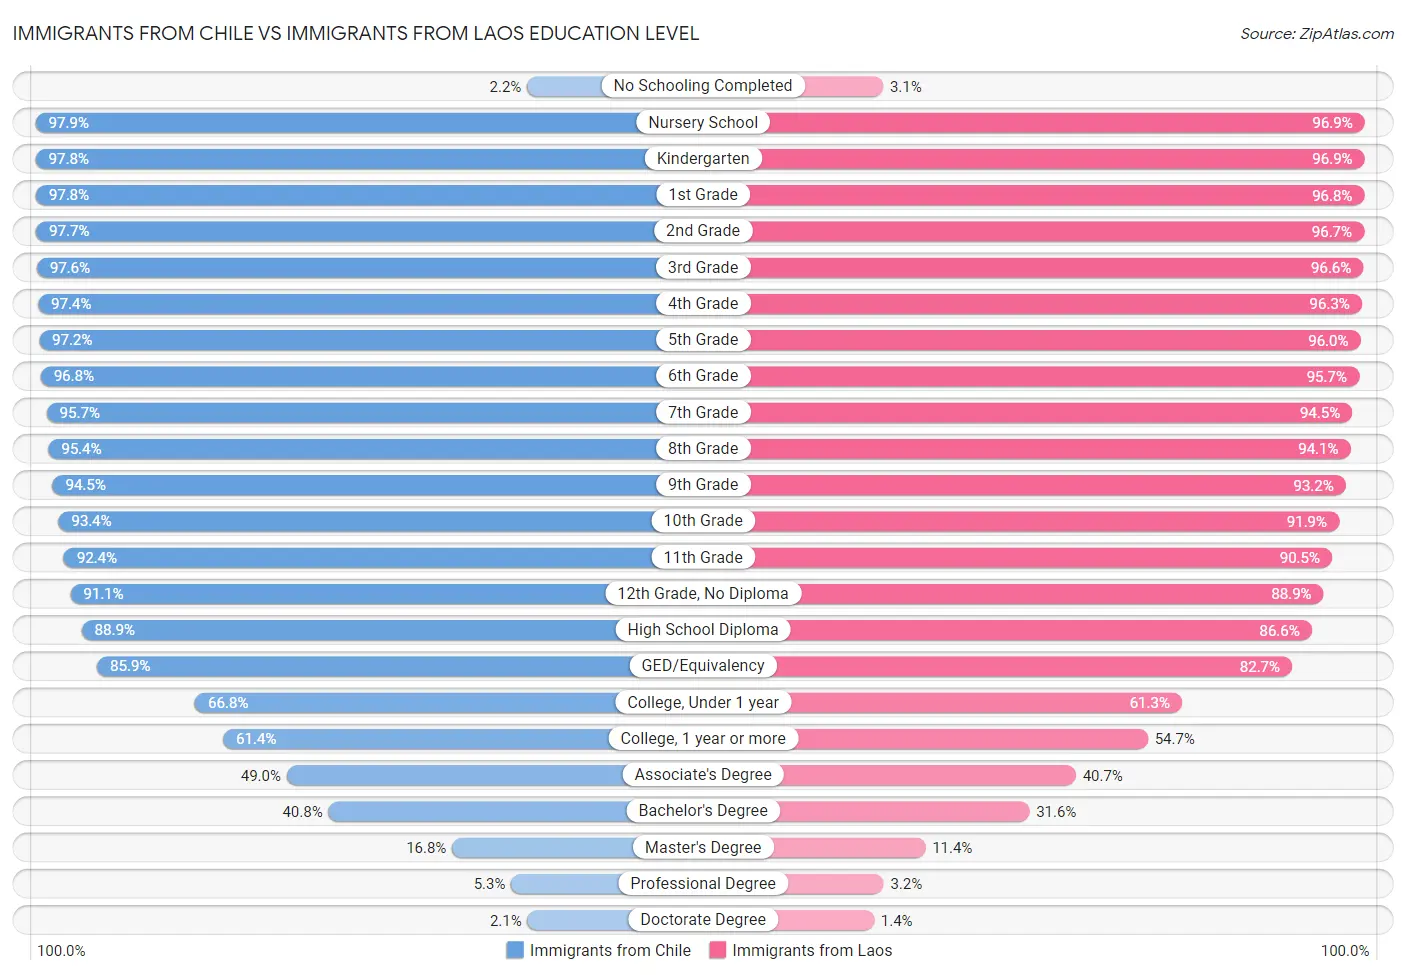 Immigrants from Chile vs Immigrants from Laos Education Level